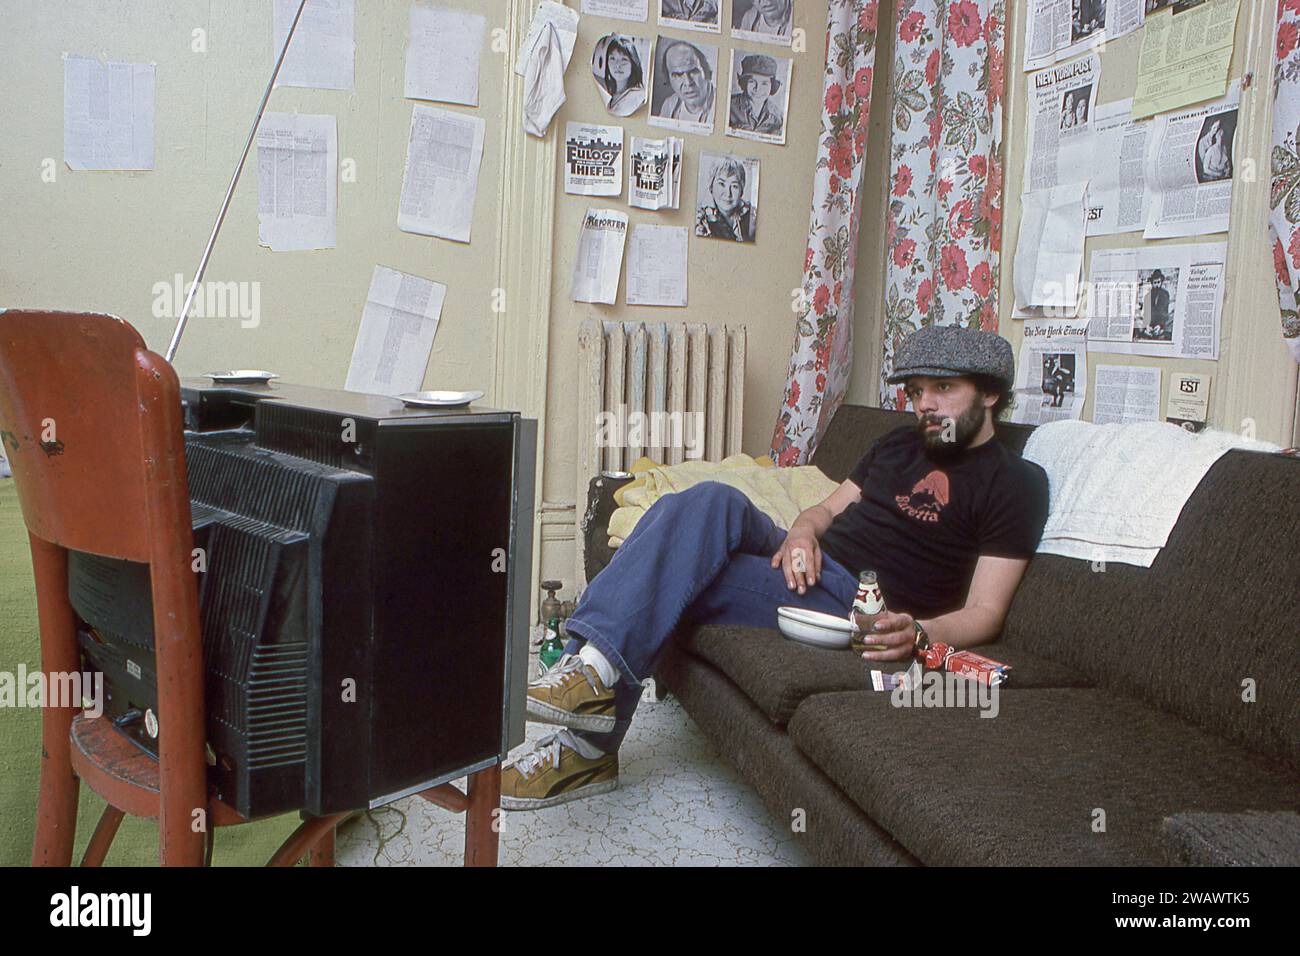 A photo of the late Miguel Piniero, playwright, actor, poet and activist. In his home studio office apartment on the Upper West Side of Manhattan in 1977. There are clippings and reviews on his wall for his play,'Eulogy for a Small Time Thief.' Stock Photo